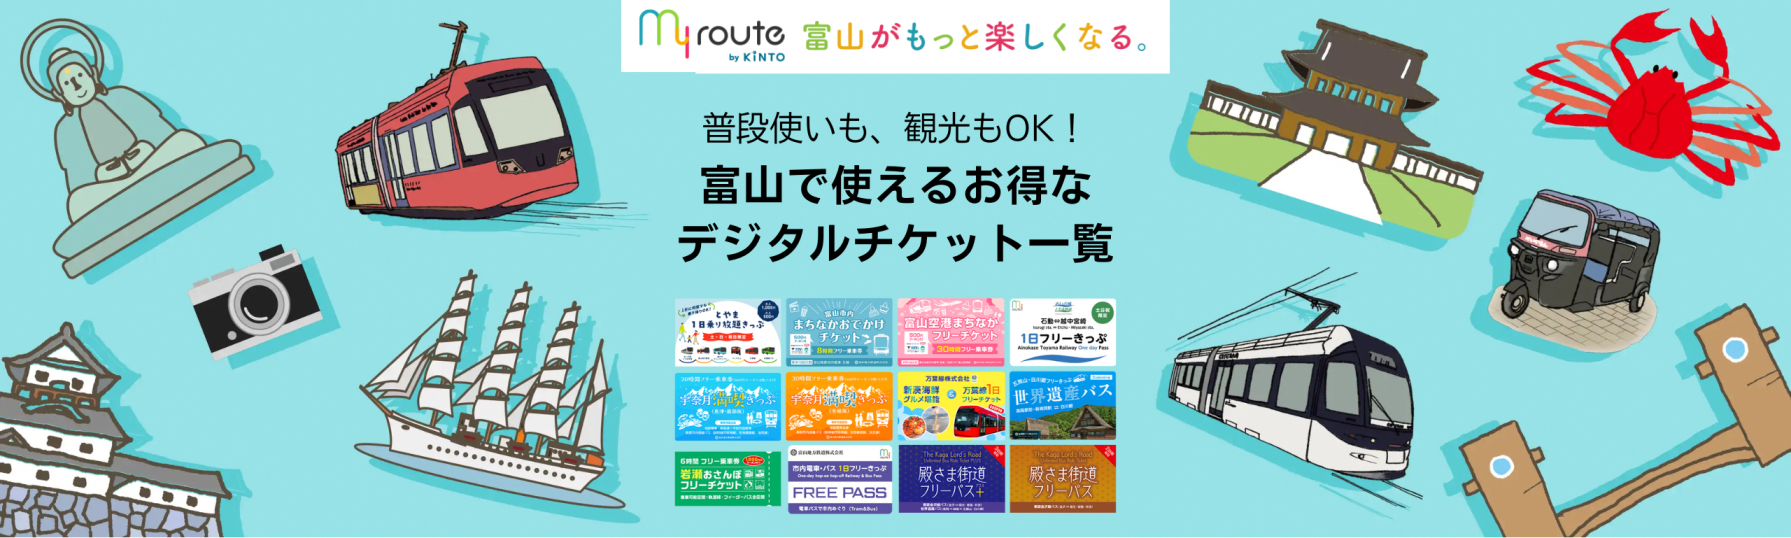 「my routeアプリ」を利用してお得に旅を楽しもう！-1